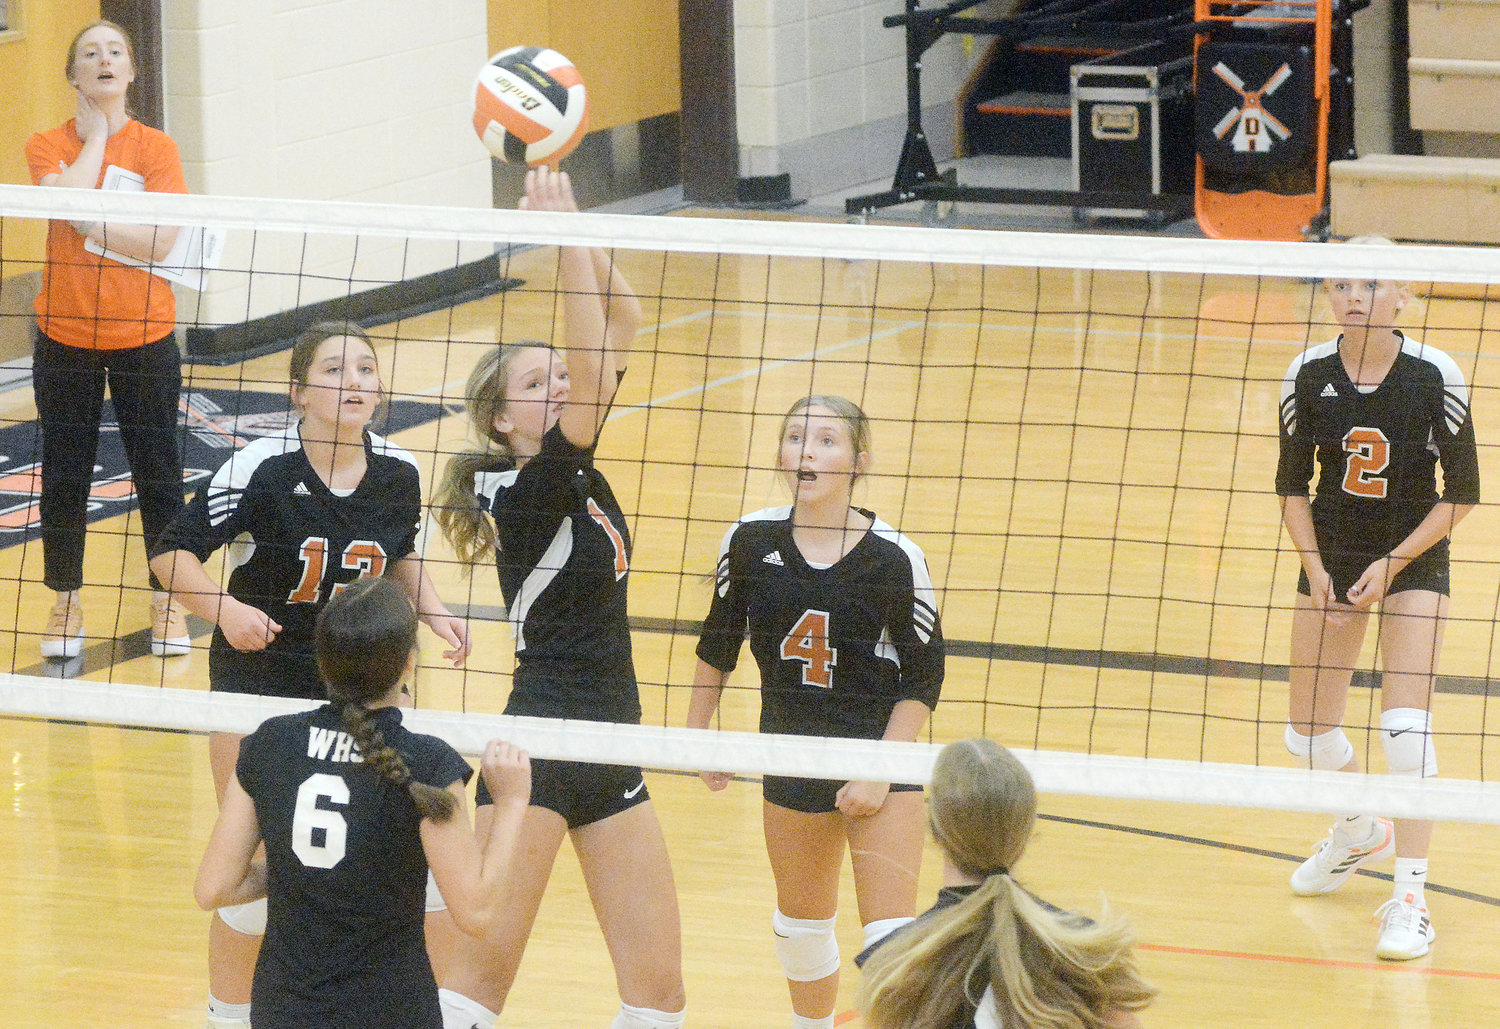 Rachel Koepke (second from left) sends the ball back over the net during freshman volleyball action last Wednesday night at Owensville High School between the Dutchgirls and Washington’s Lady Blue Jays.